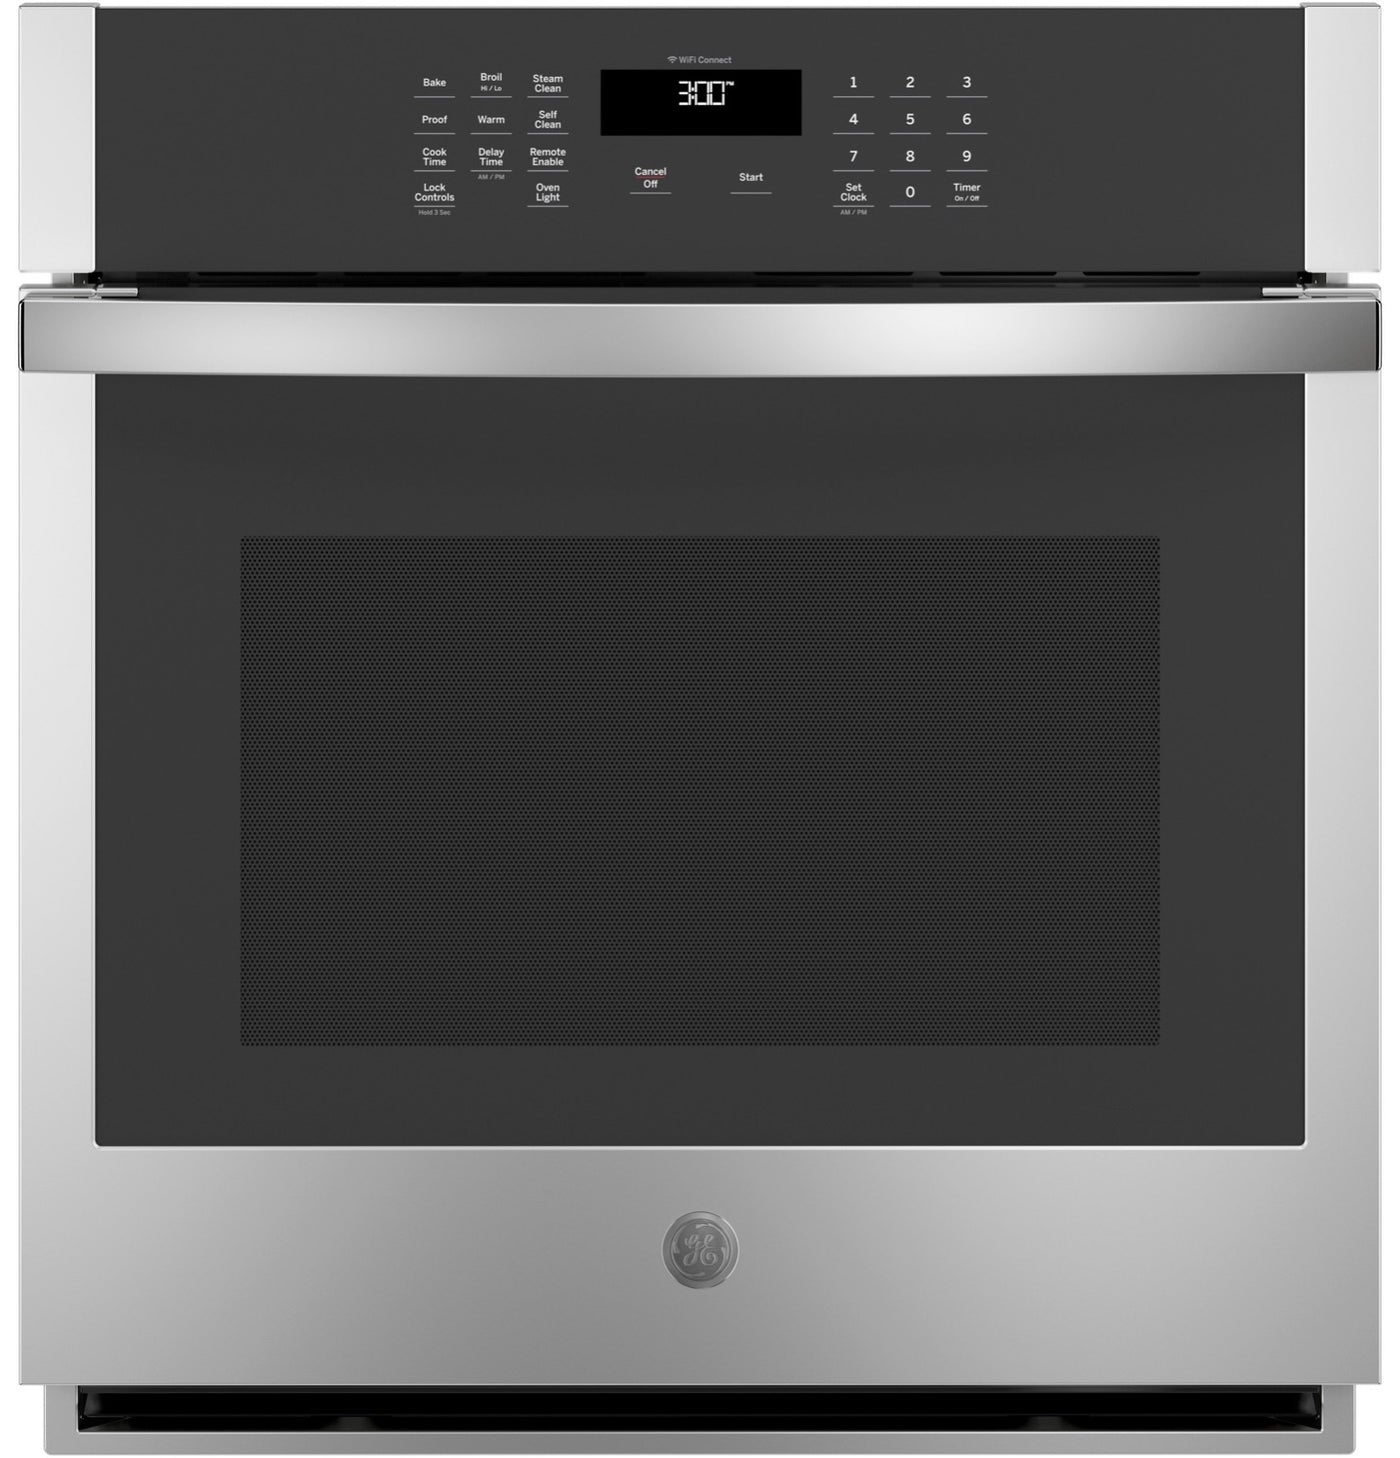 GE Stainless Steel Single Wall Oven (4.3 Cu.Ft.) - JKS3000SNSS